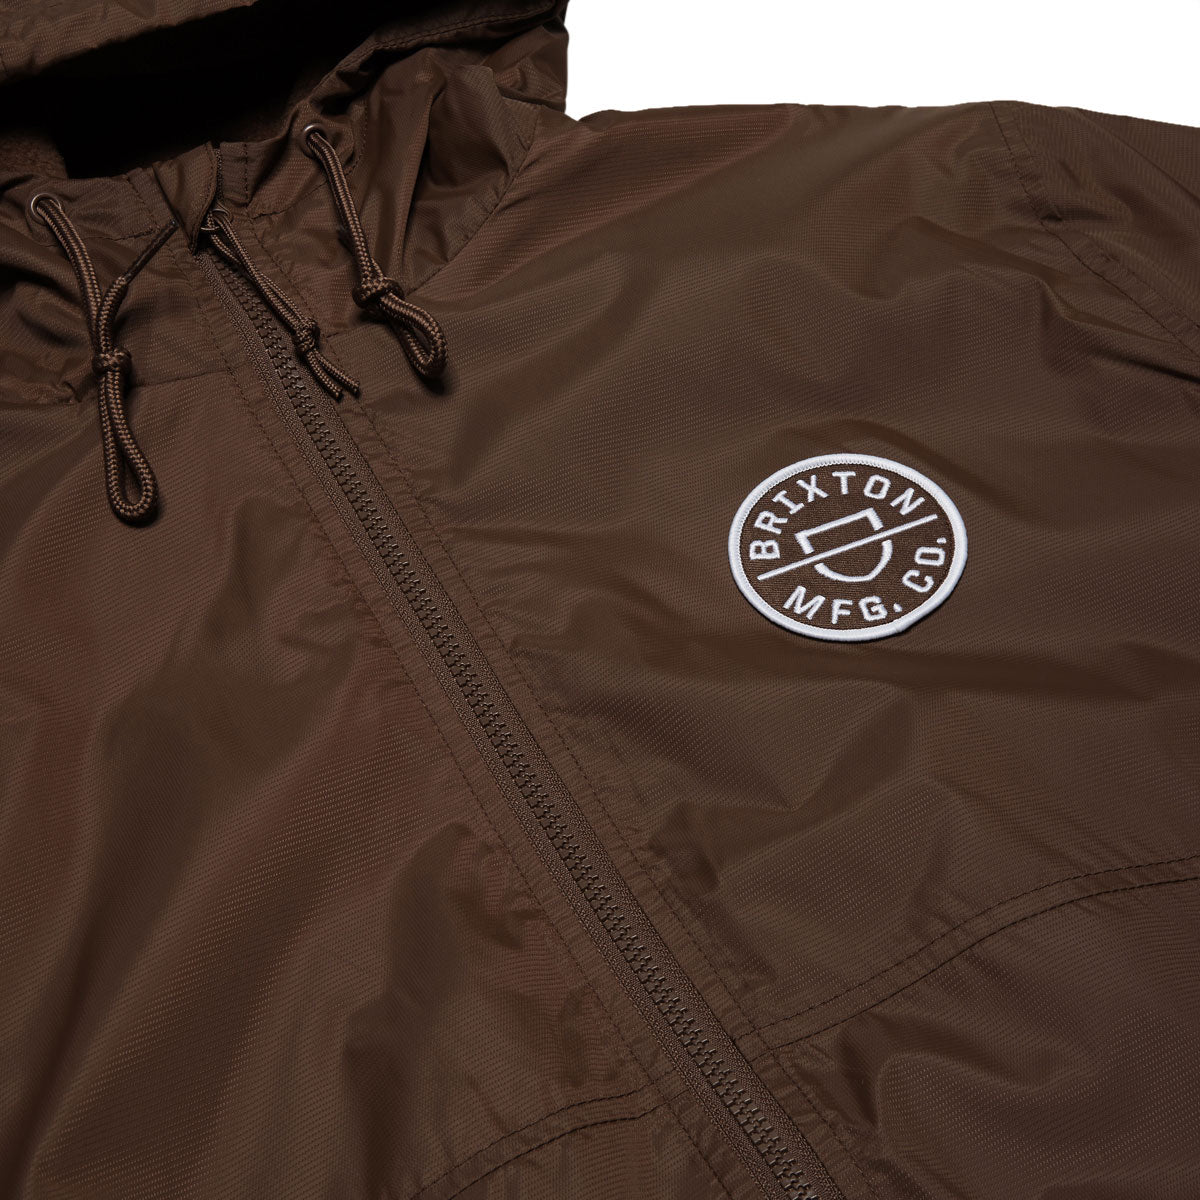 Brixton Claxton Crest Lined Hooded Jacket - Bison image 3